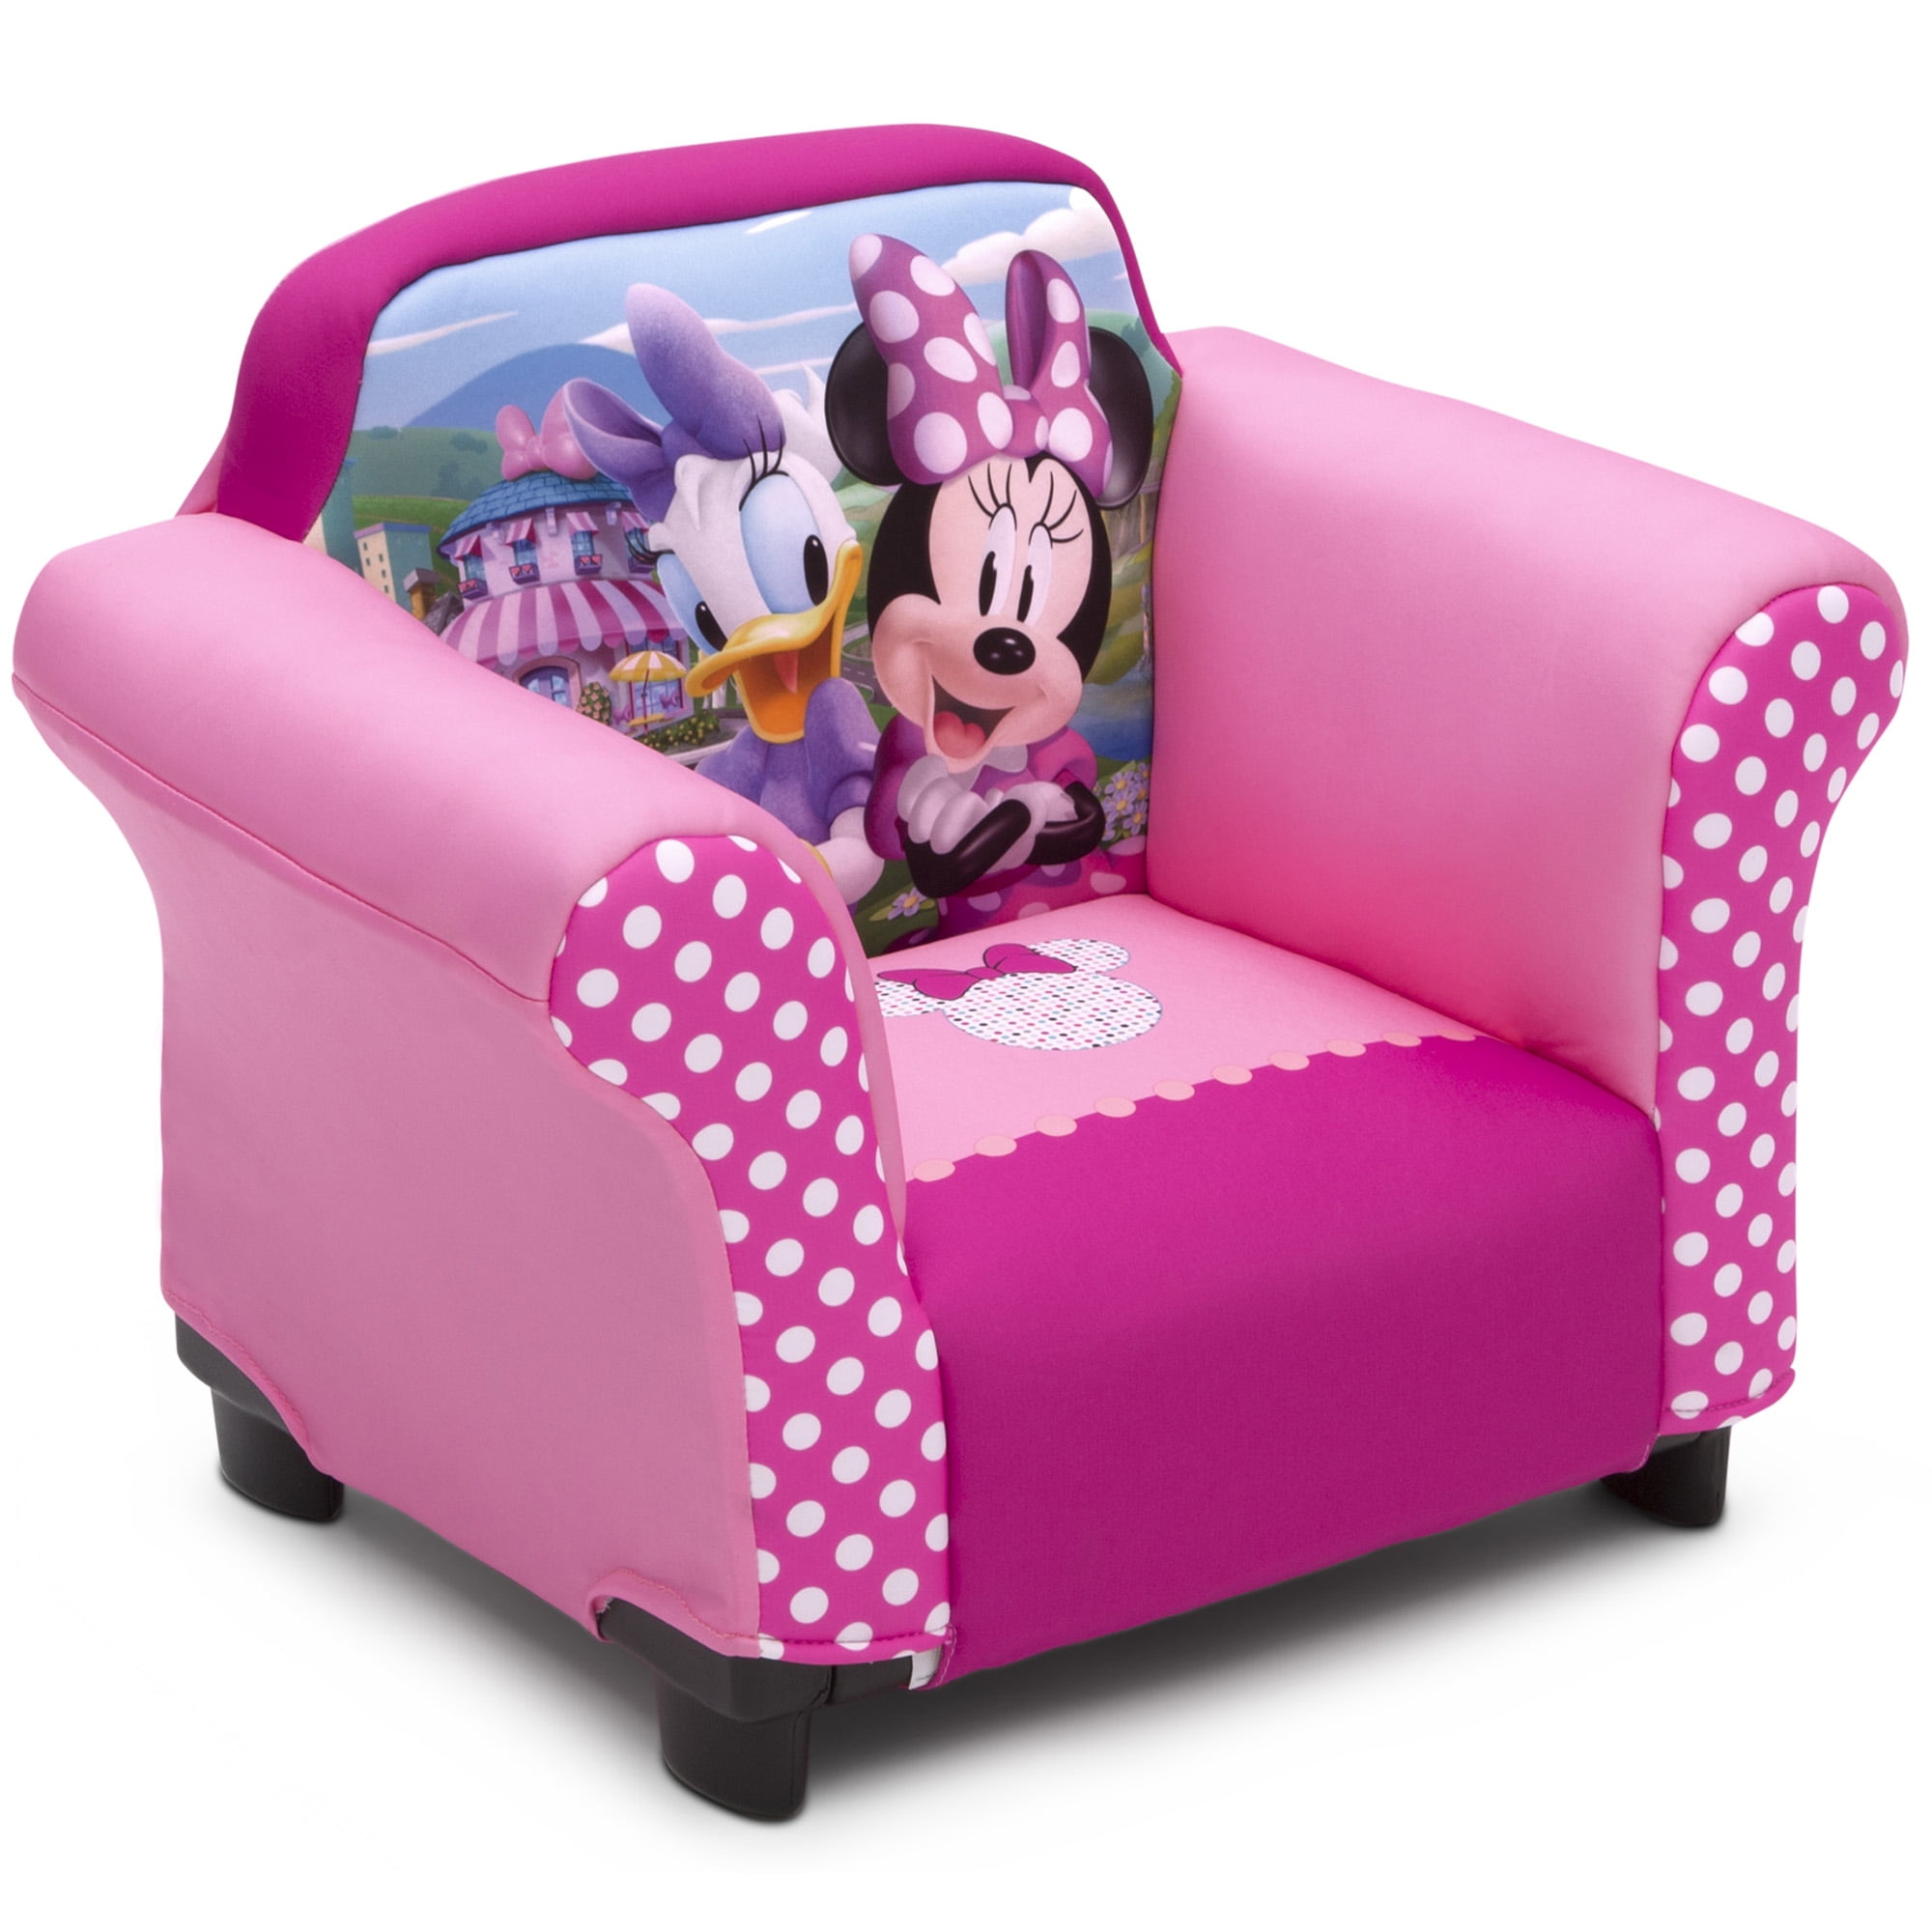 Disney Inflatable Moon Chair Seat Minnie Mouse Princess Cars PVC Childrens Kids 